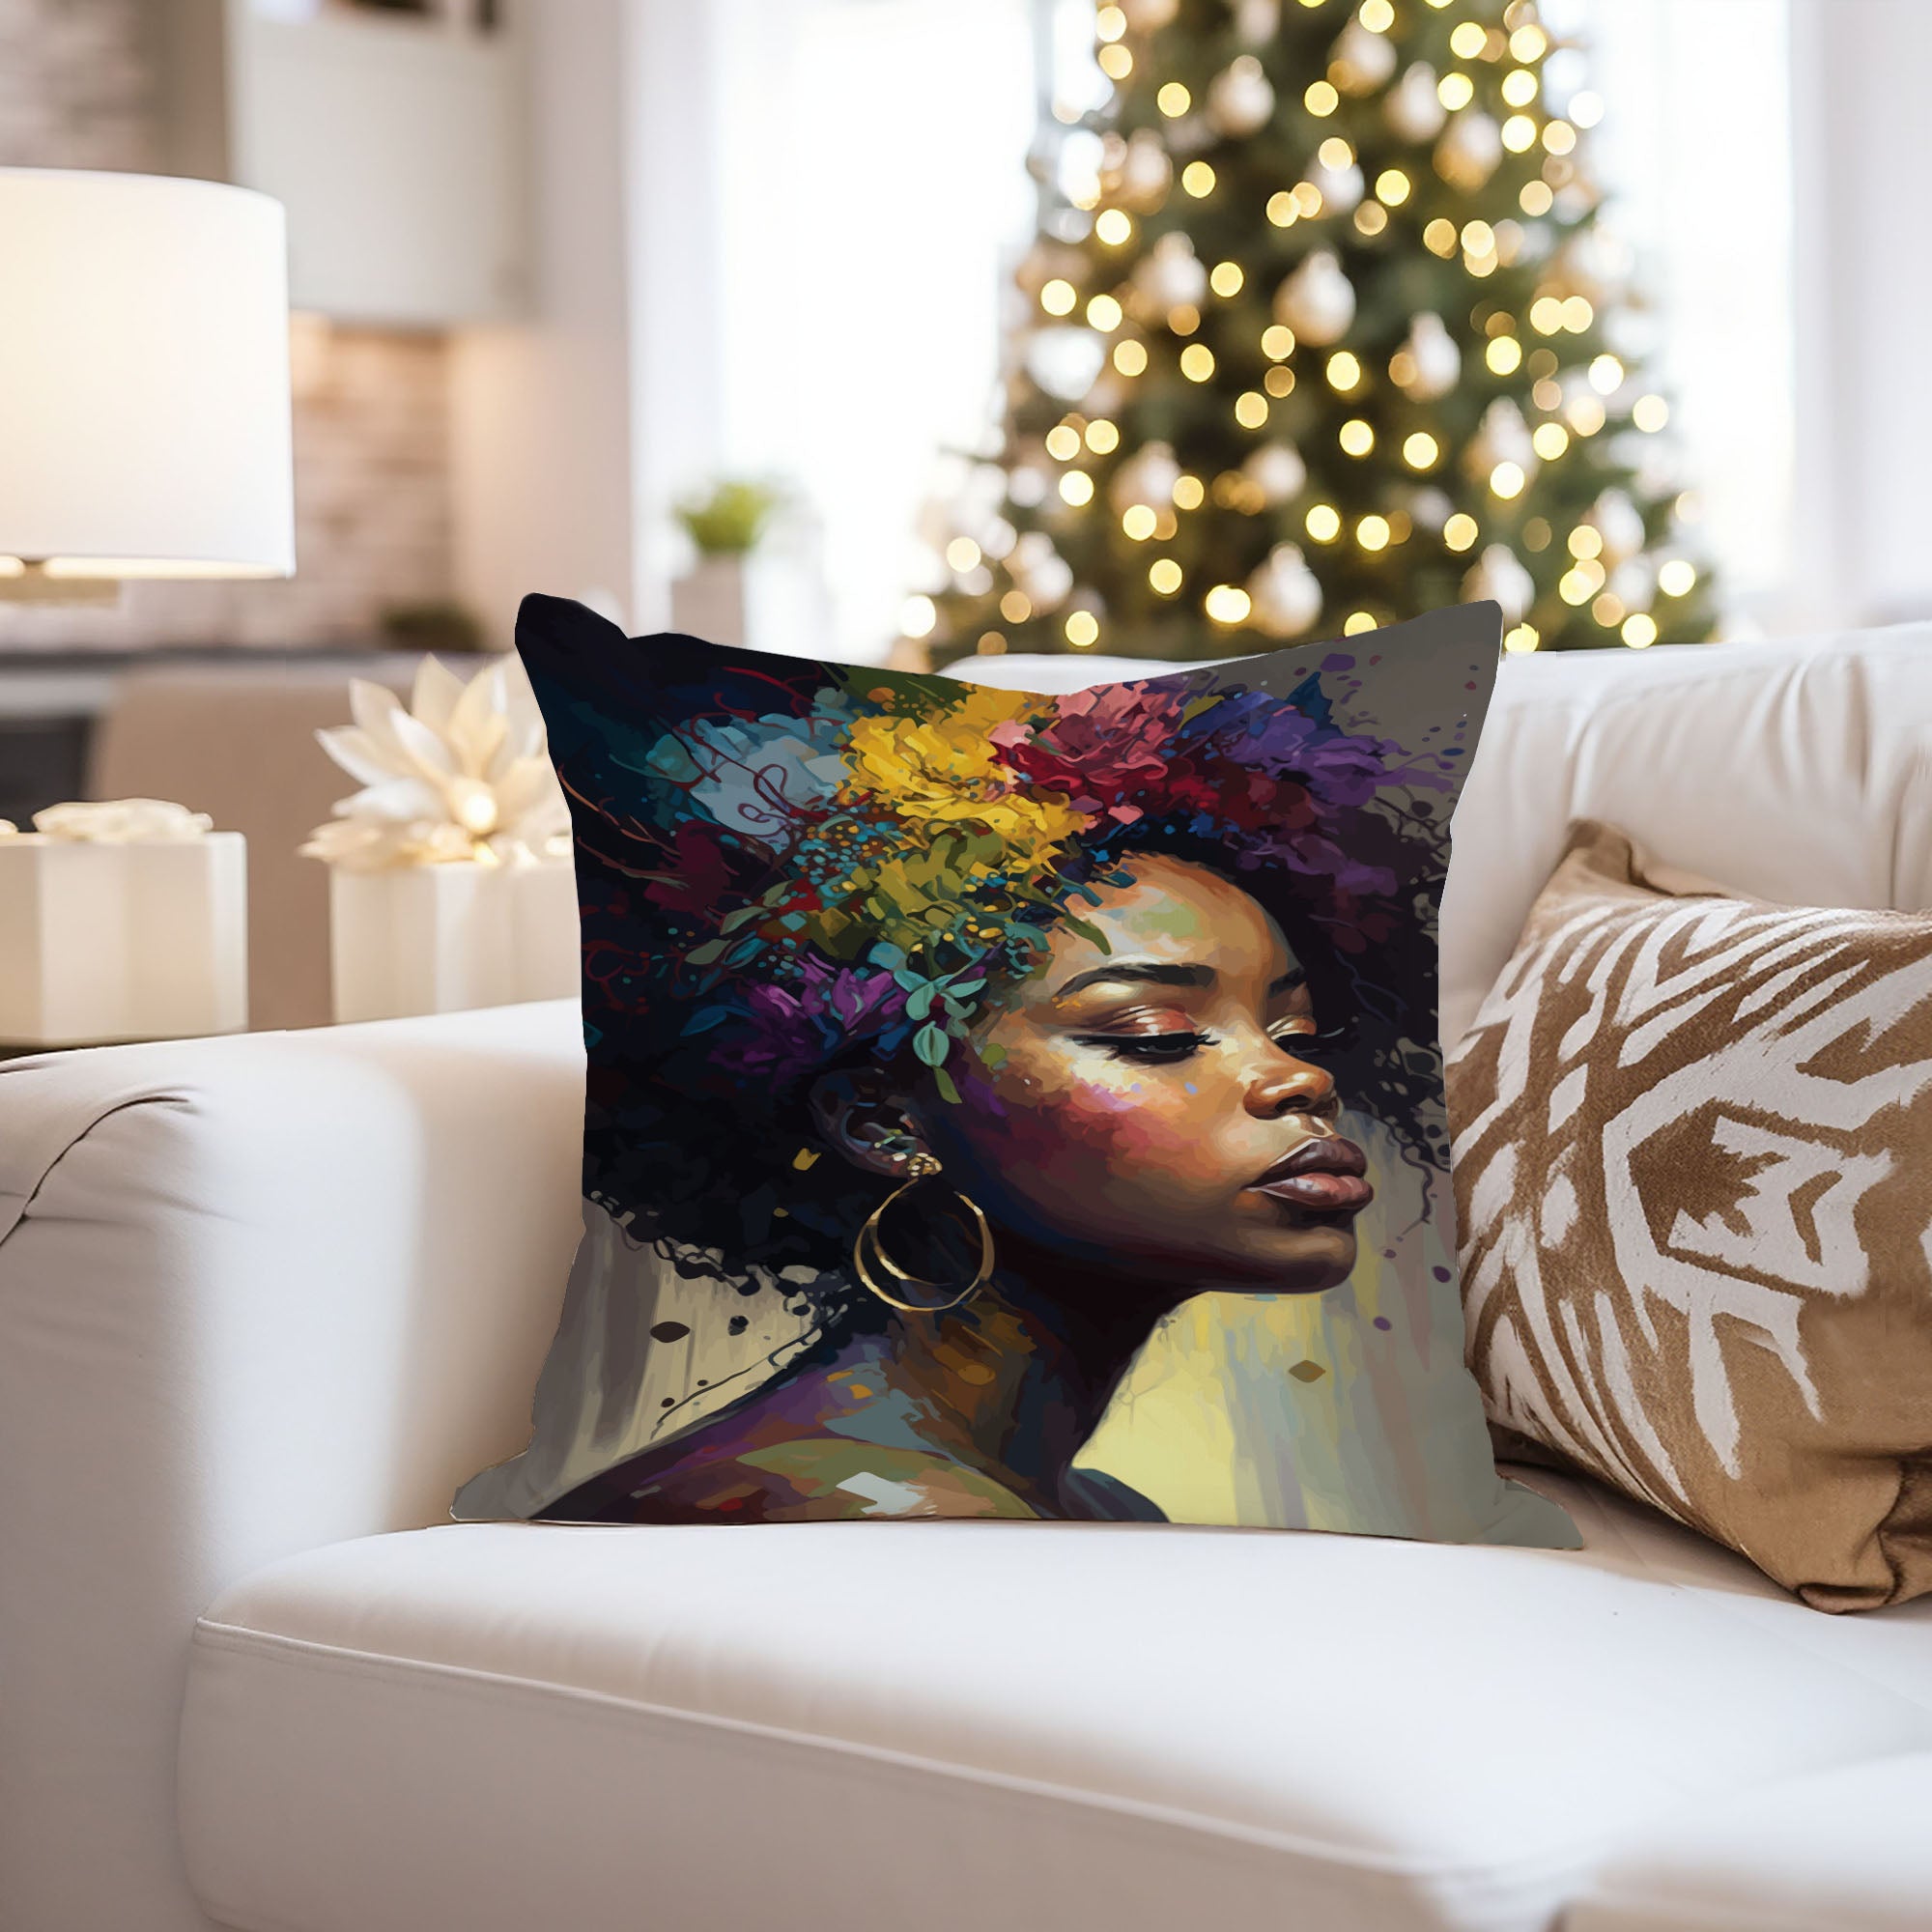 Ethan Taylor People & Portraits Throw Pillow Soft Cushion Cover 'Black Woman Portrait, African American Art Female Portraits' Modern Decorative Square Accent Pillow Case, 16x16 Inches, Brown, Green - image 4 of 5